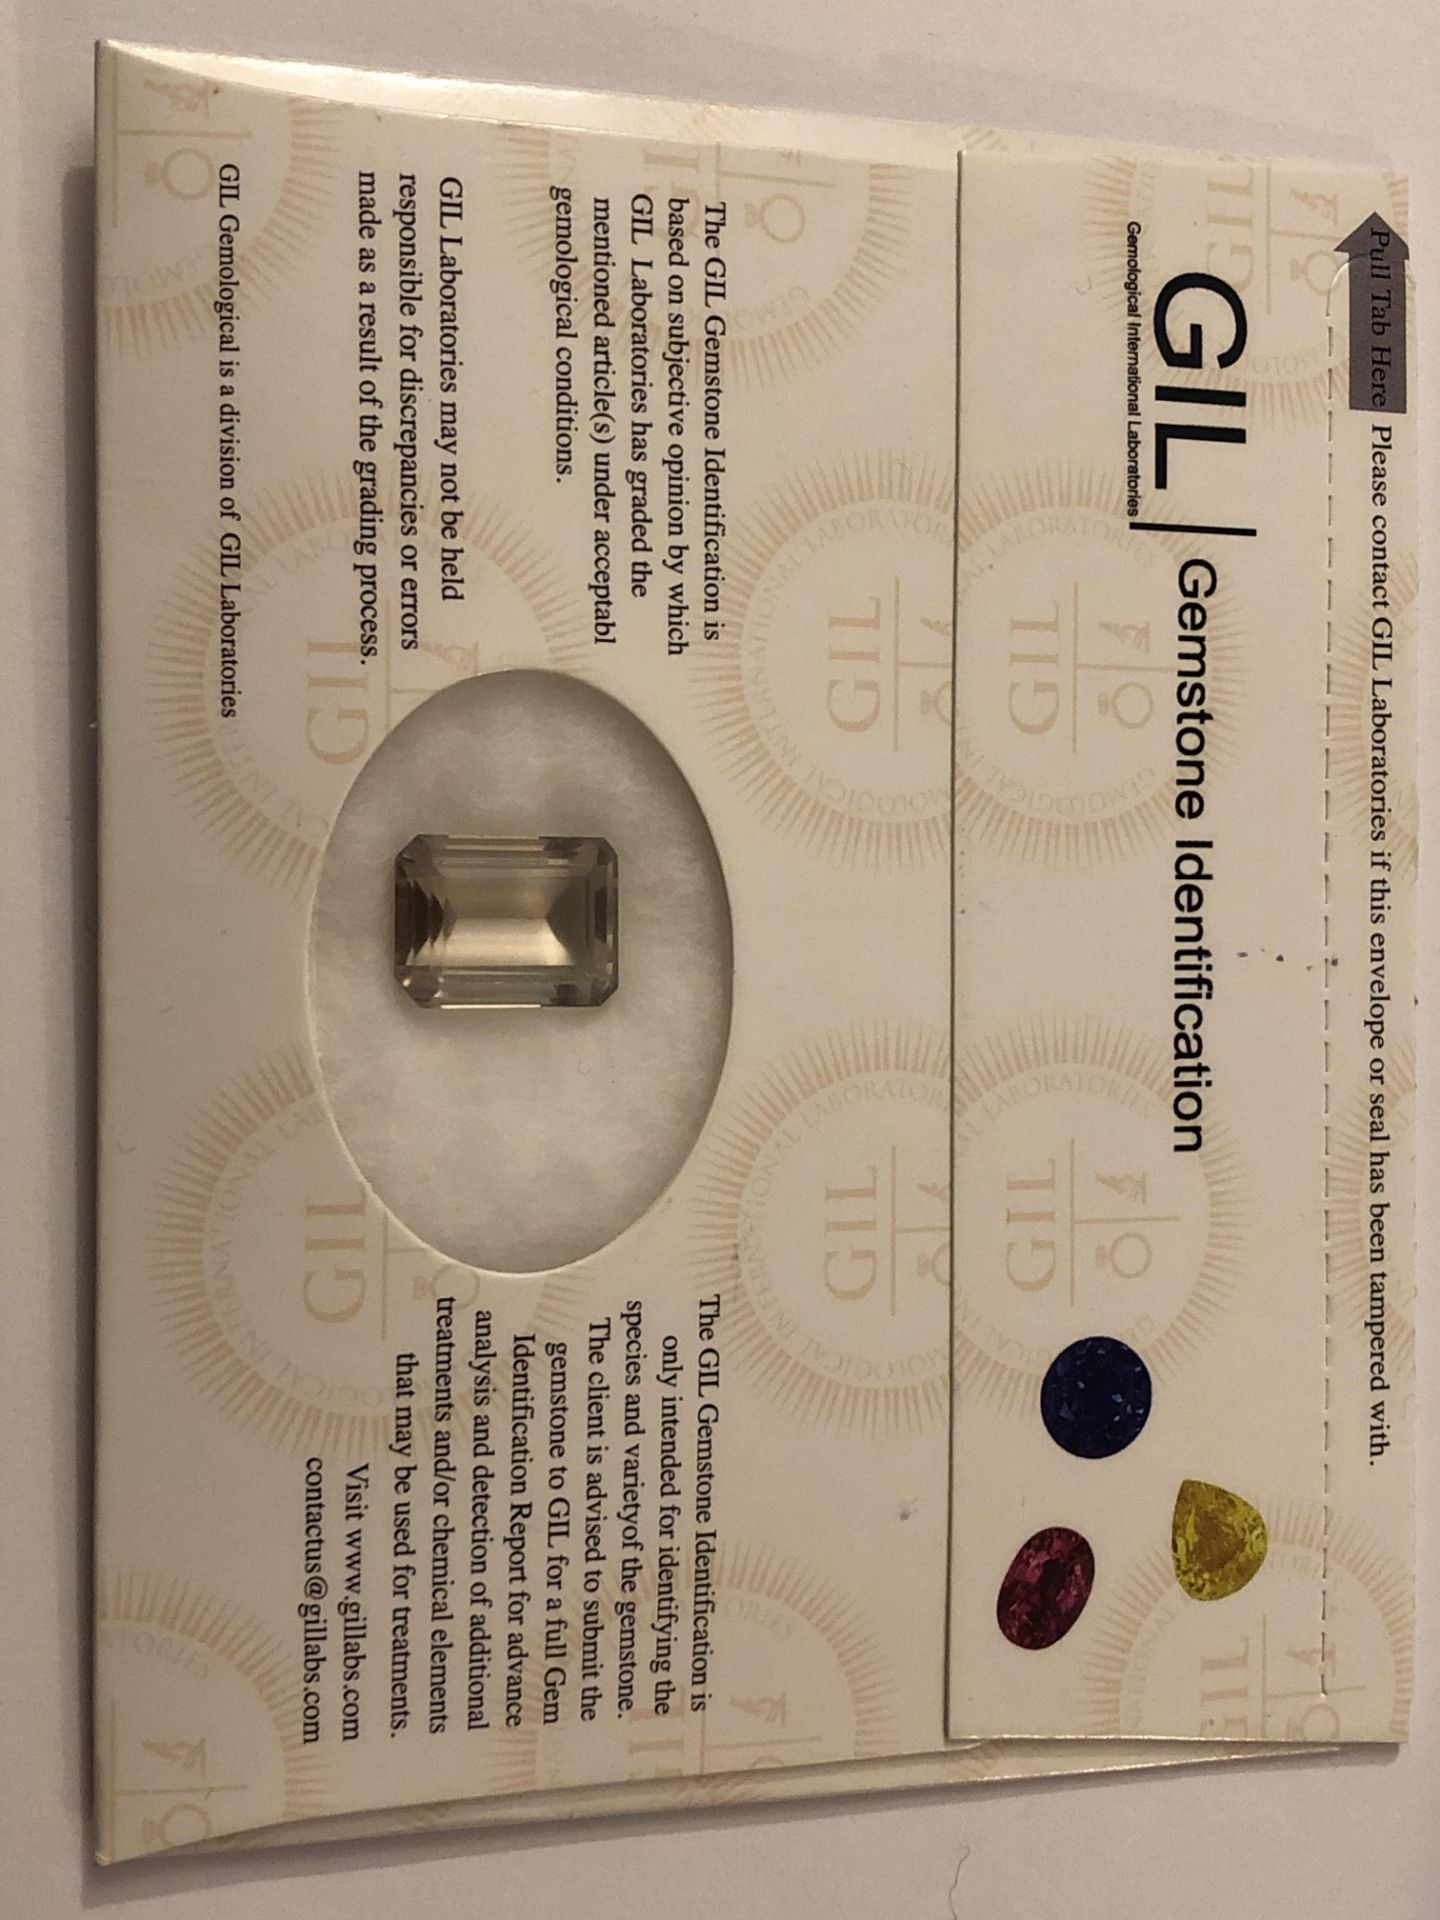 11.2ct Natural Quartz with GIL Certificate - Image 2 of 6